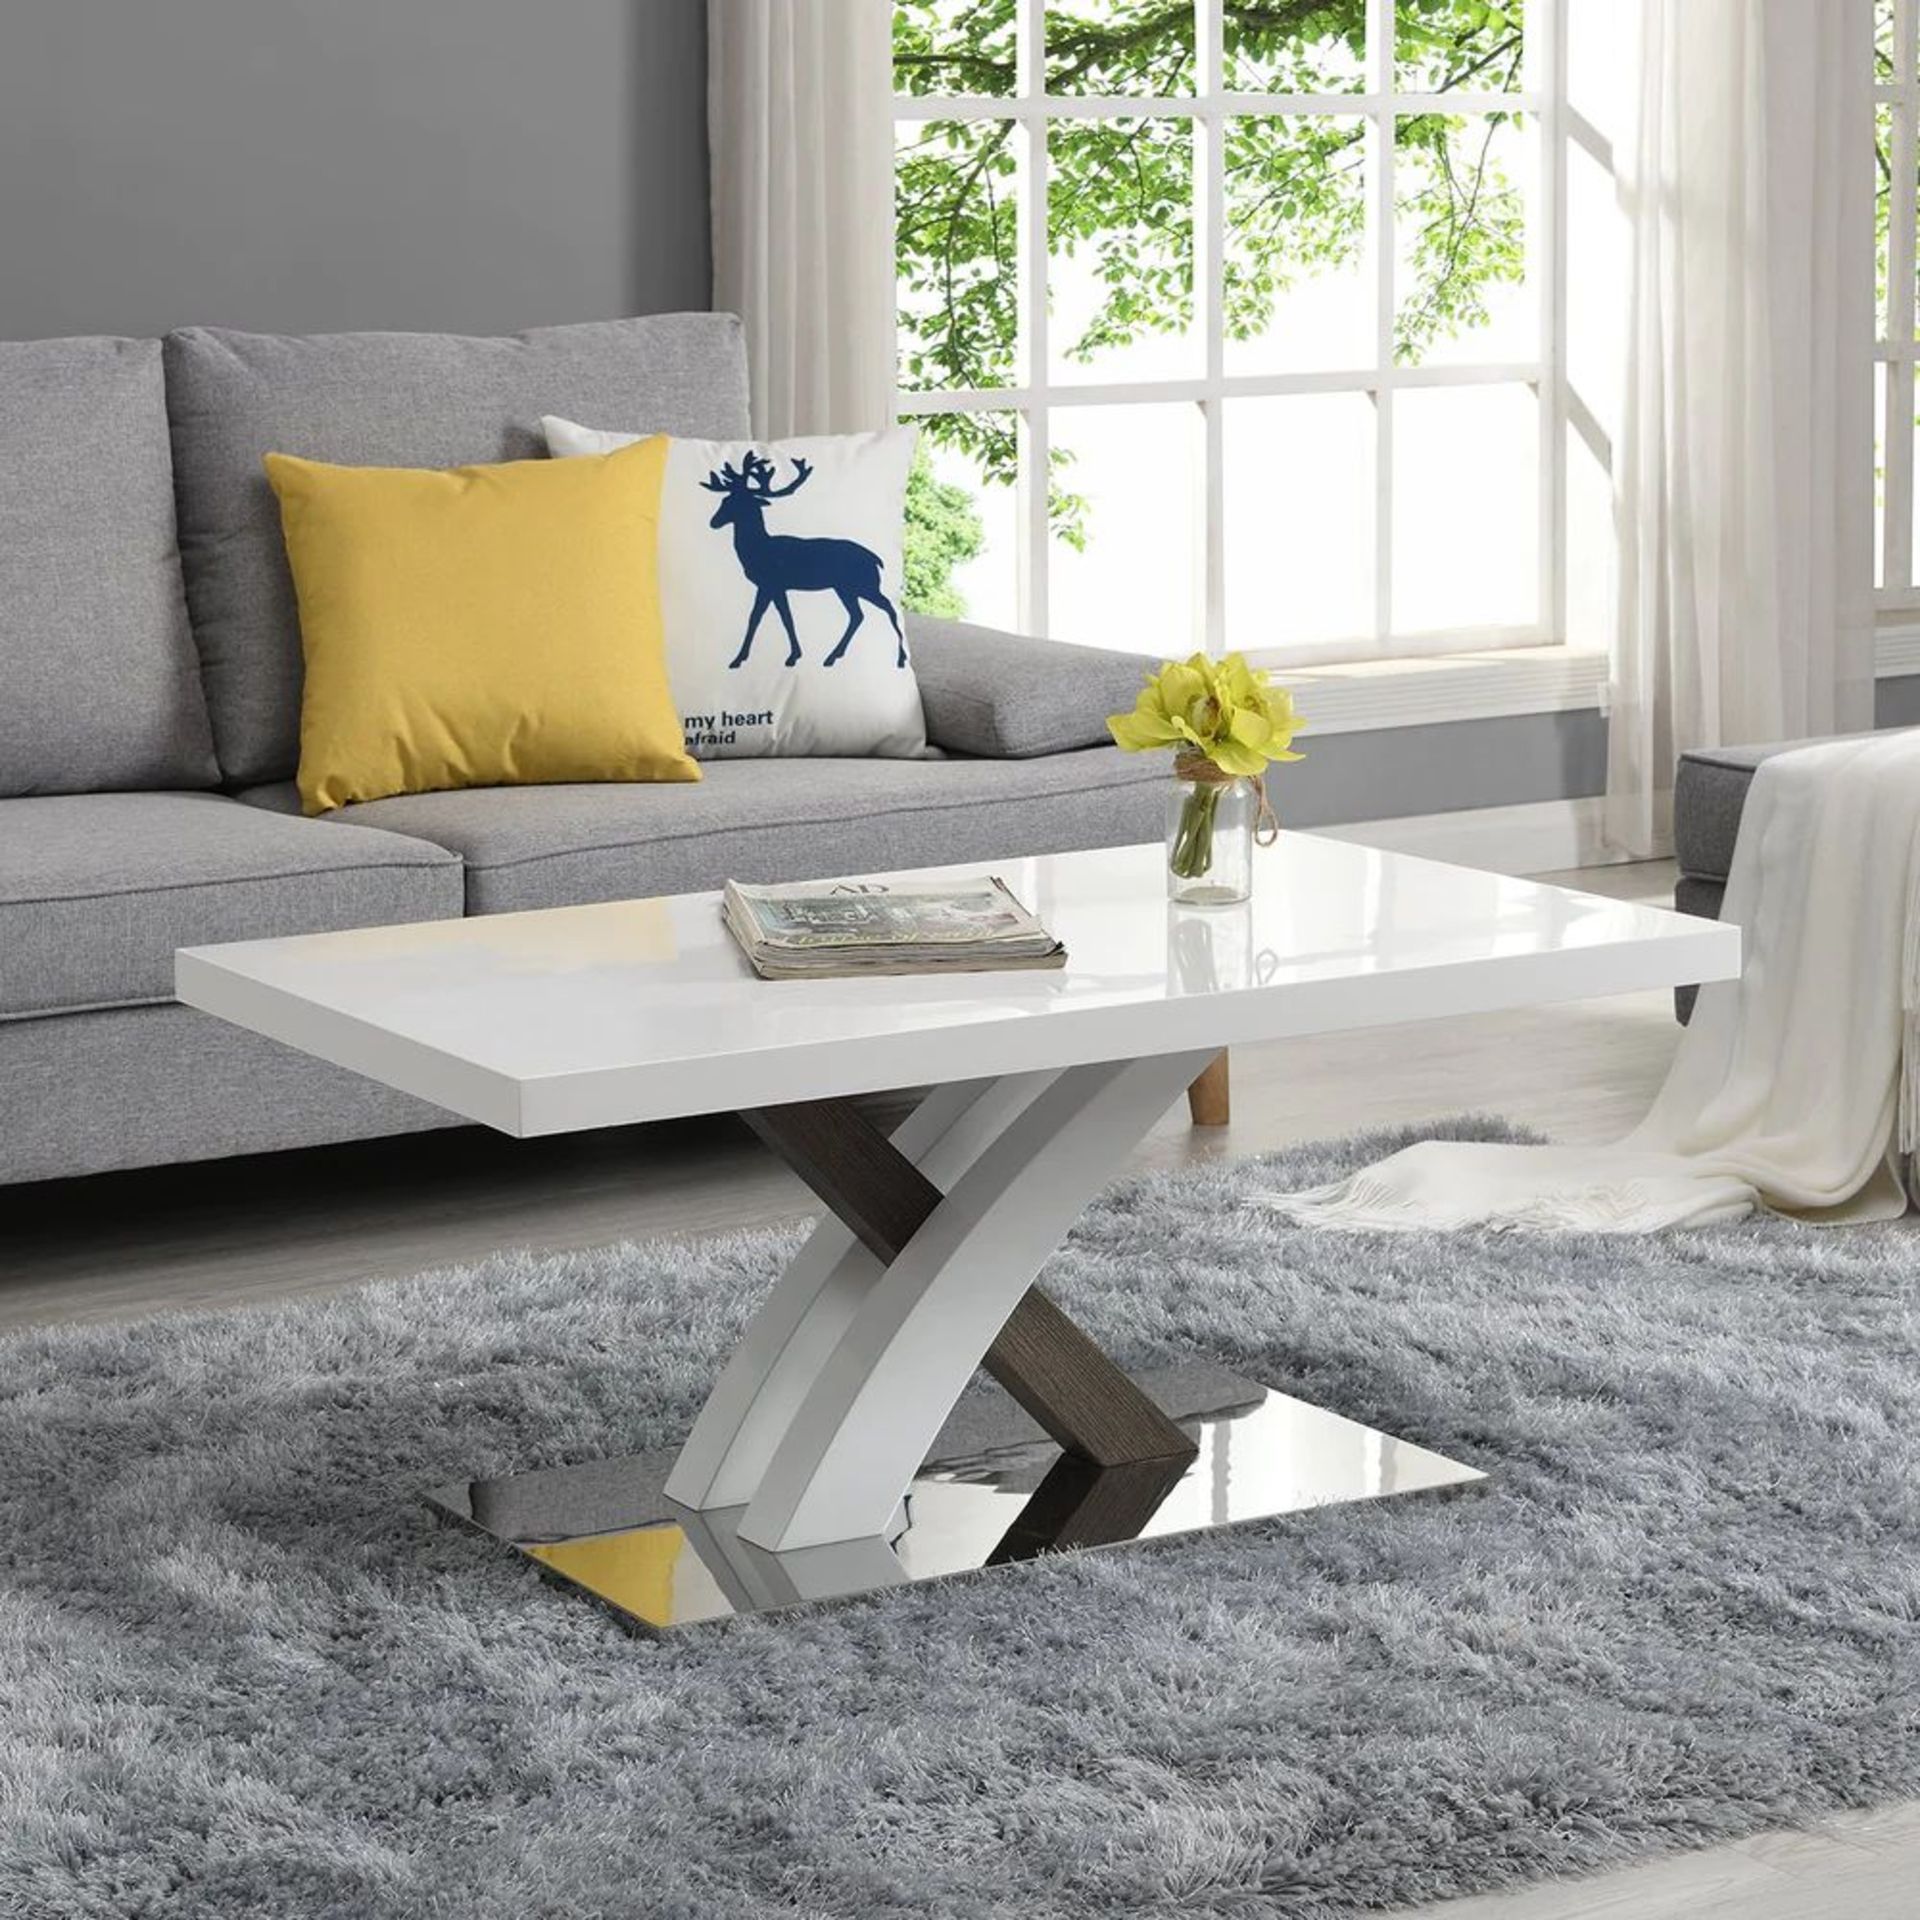 Basel High Gloss White Coffee Table with Stainless Steel Base. - ER23. RRP £199.99. The white glossy